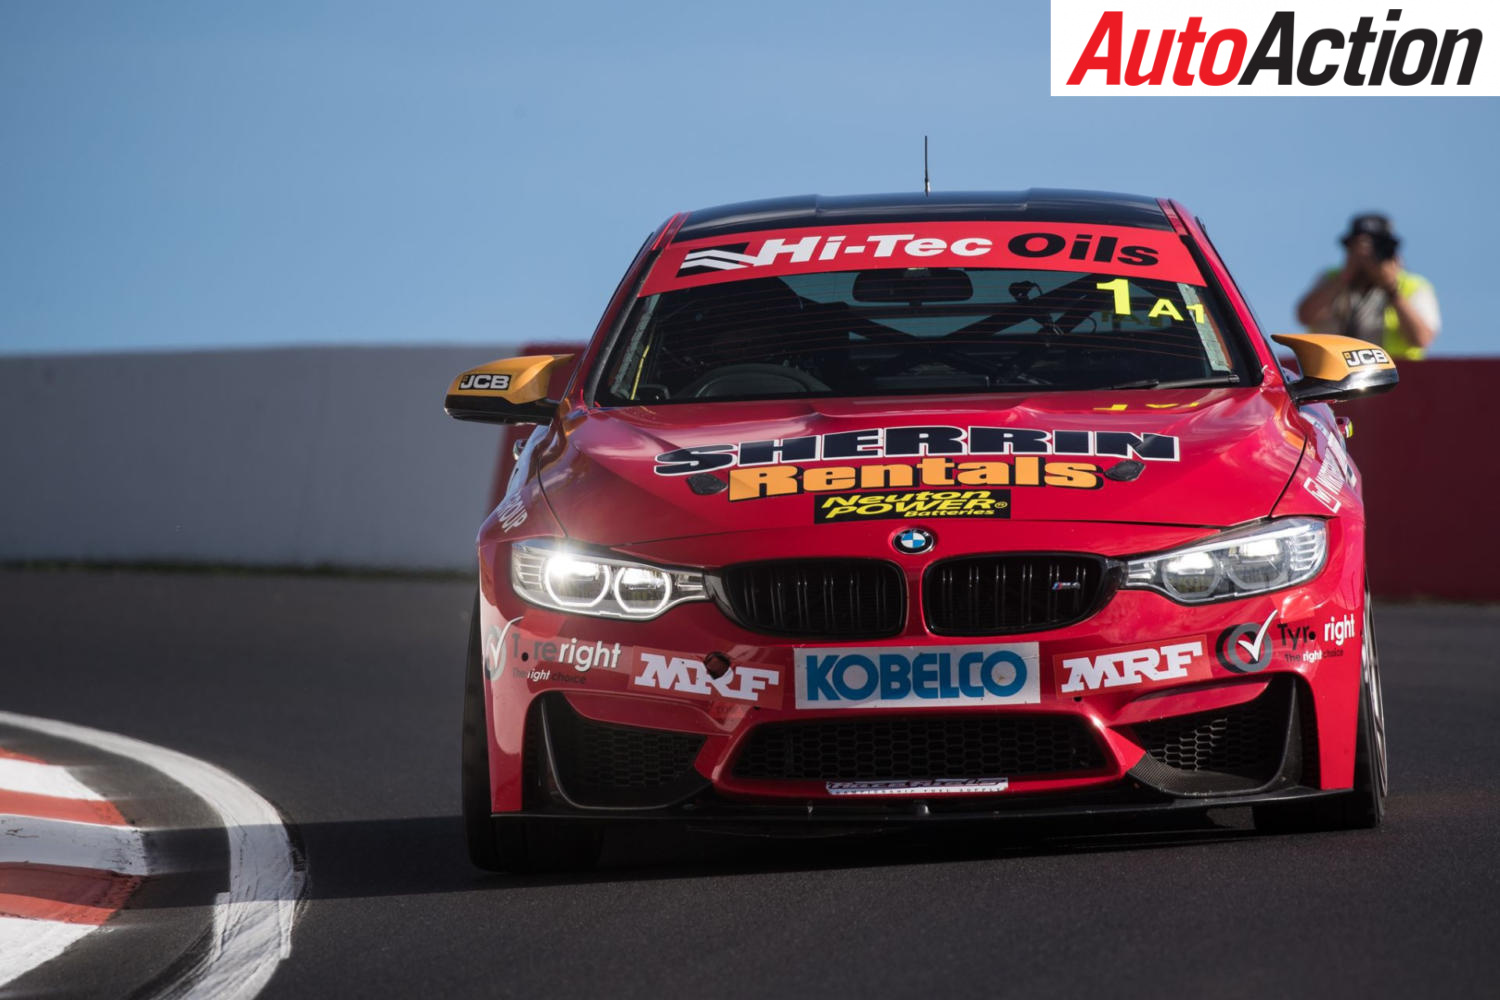 Grant and Iain Sherrin led the way in Bathurst 6 Hour practice - Photo: InSyde Media